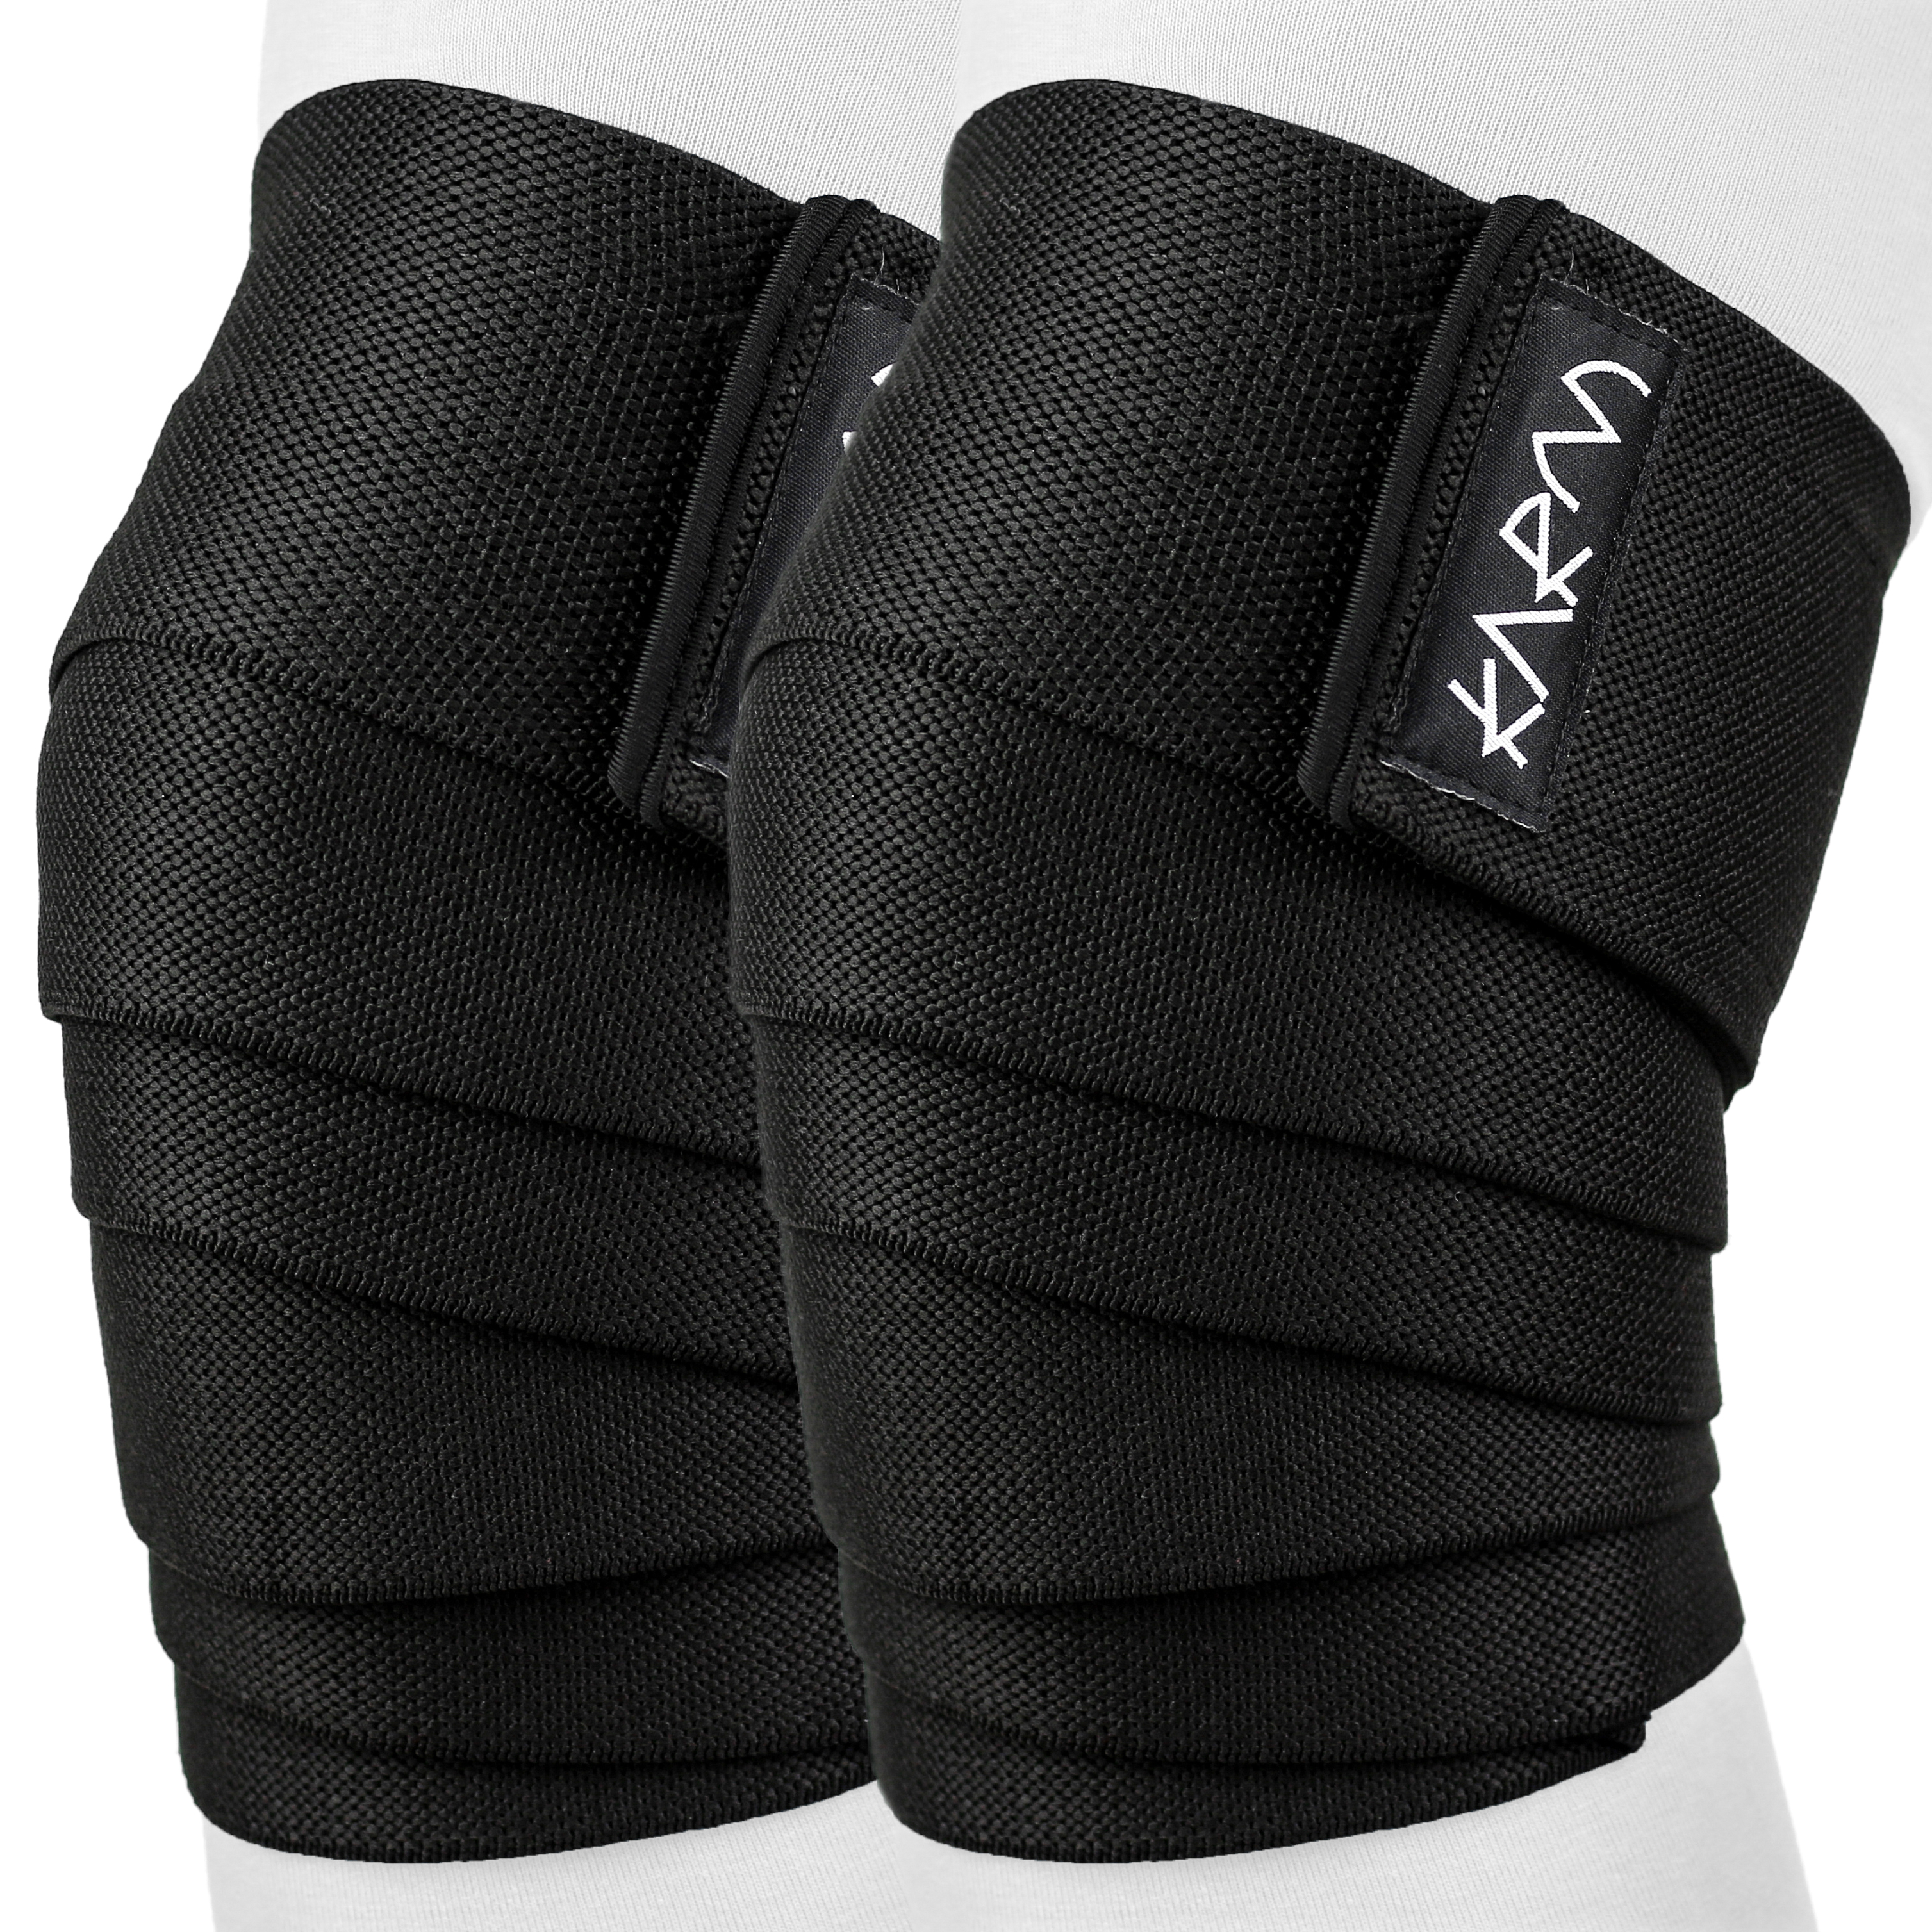 Squat knee sleeves are a pivotal tool for individuals engaged in weightlifting or intense squat exercises.